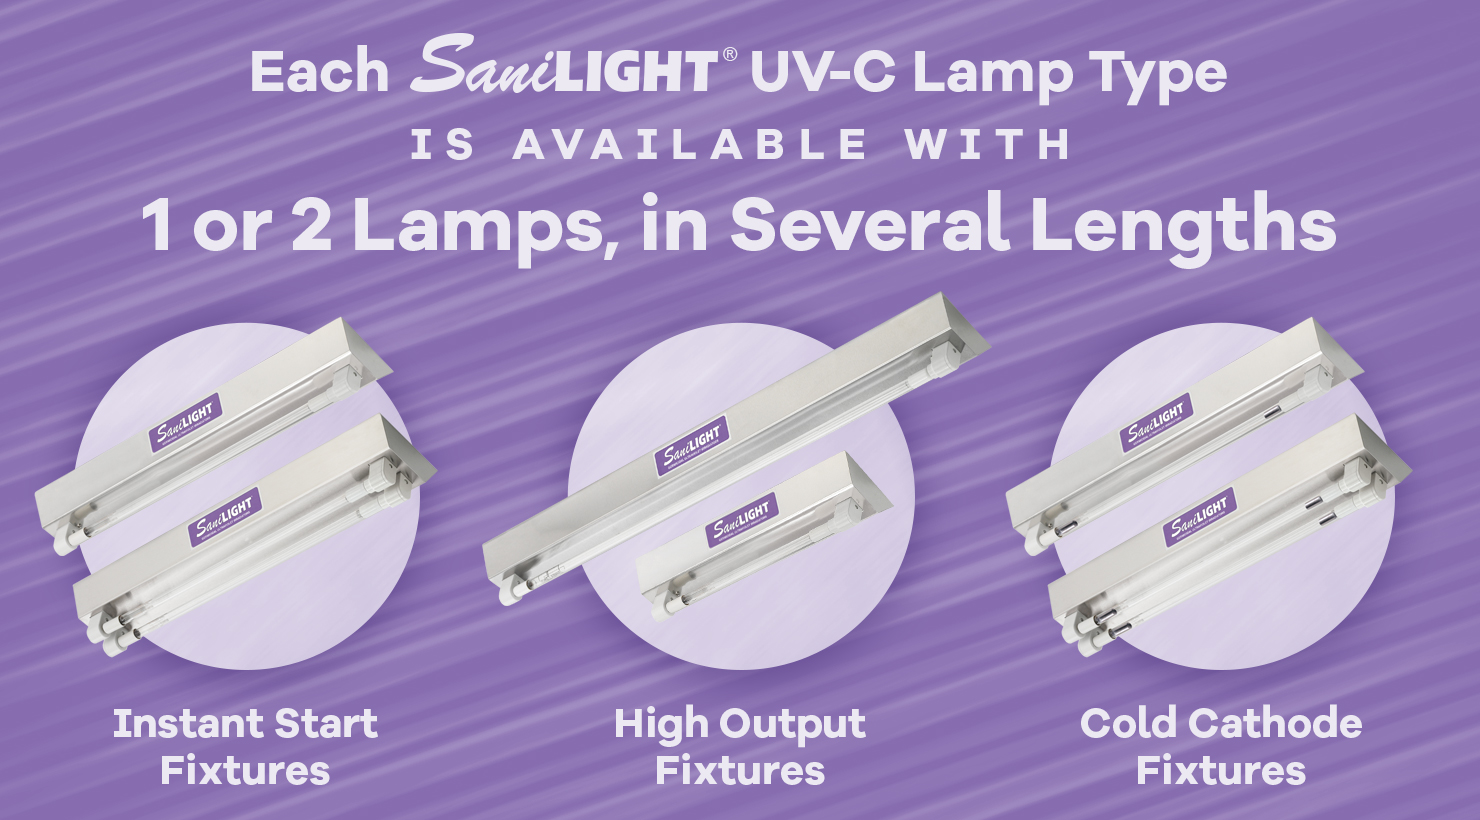 SaniLIGHT Direct Germicidal UV-C Fixtures Disinfect with 4 Key Features